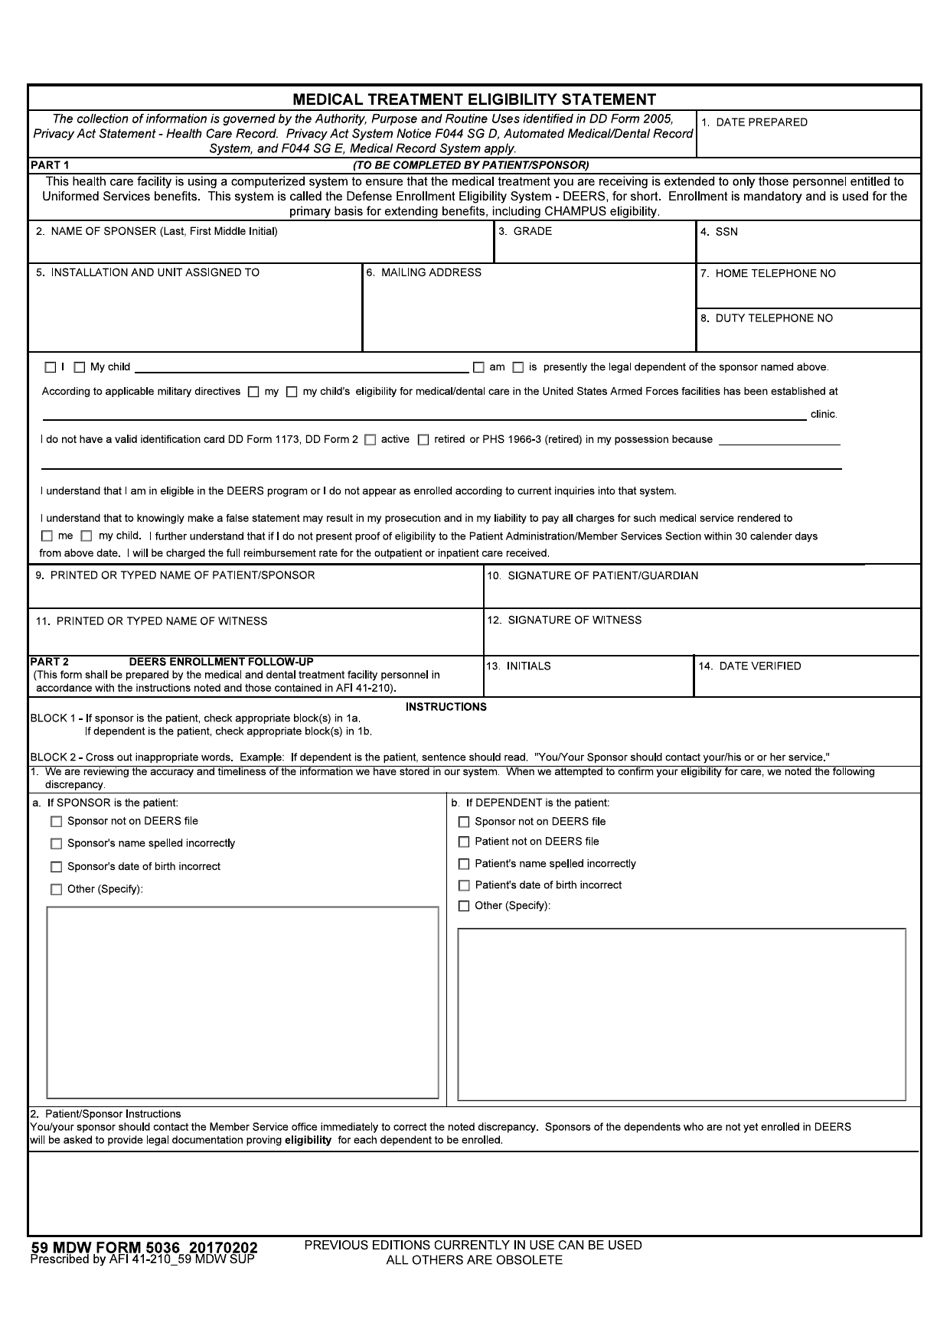 59 MDW Form 5036 Medical Treatment Eligibility Statement, Page 1